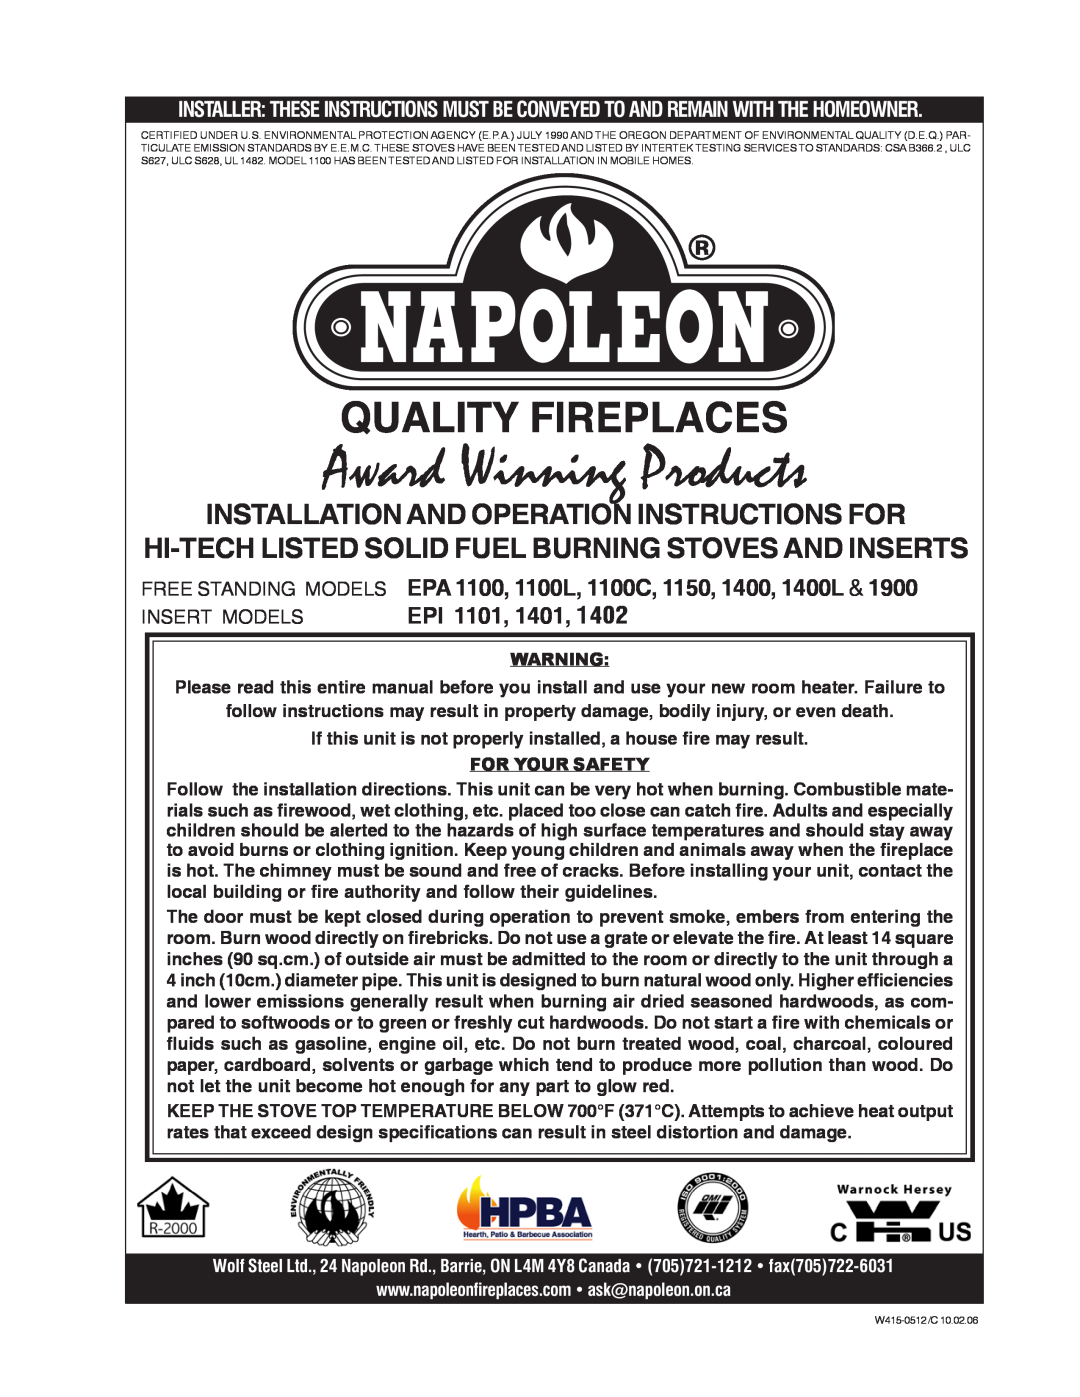 Napoleon Fireplaces EPA1400L, EPI 1402, EPA1900 specifications Installation And Operation Instructions For, For Your Safety 